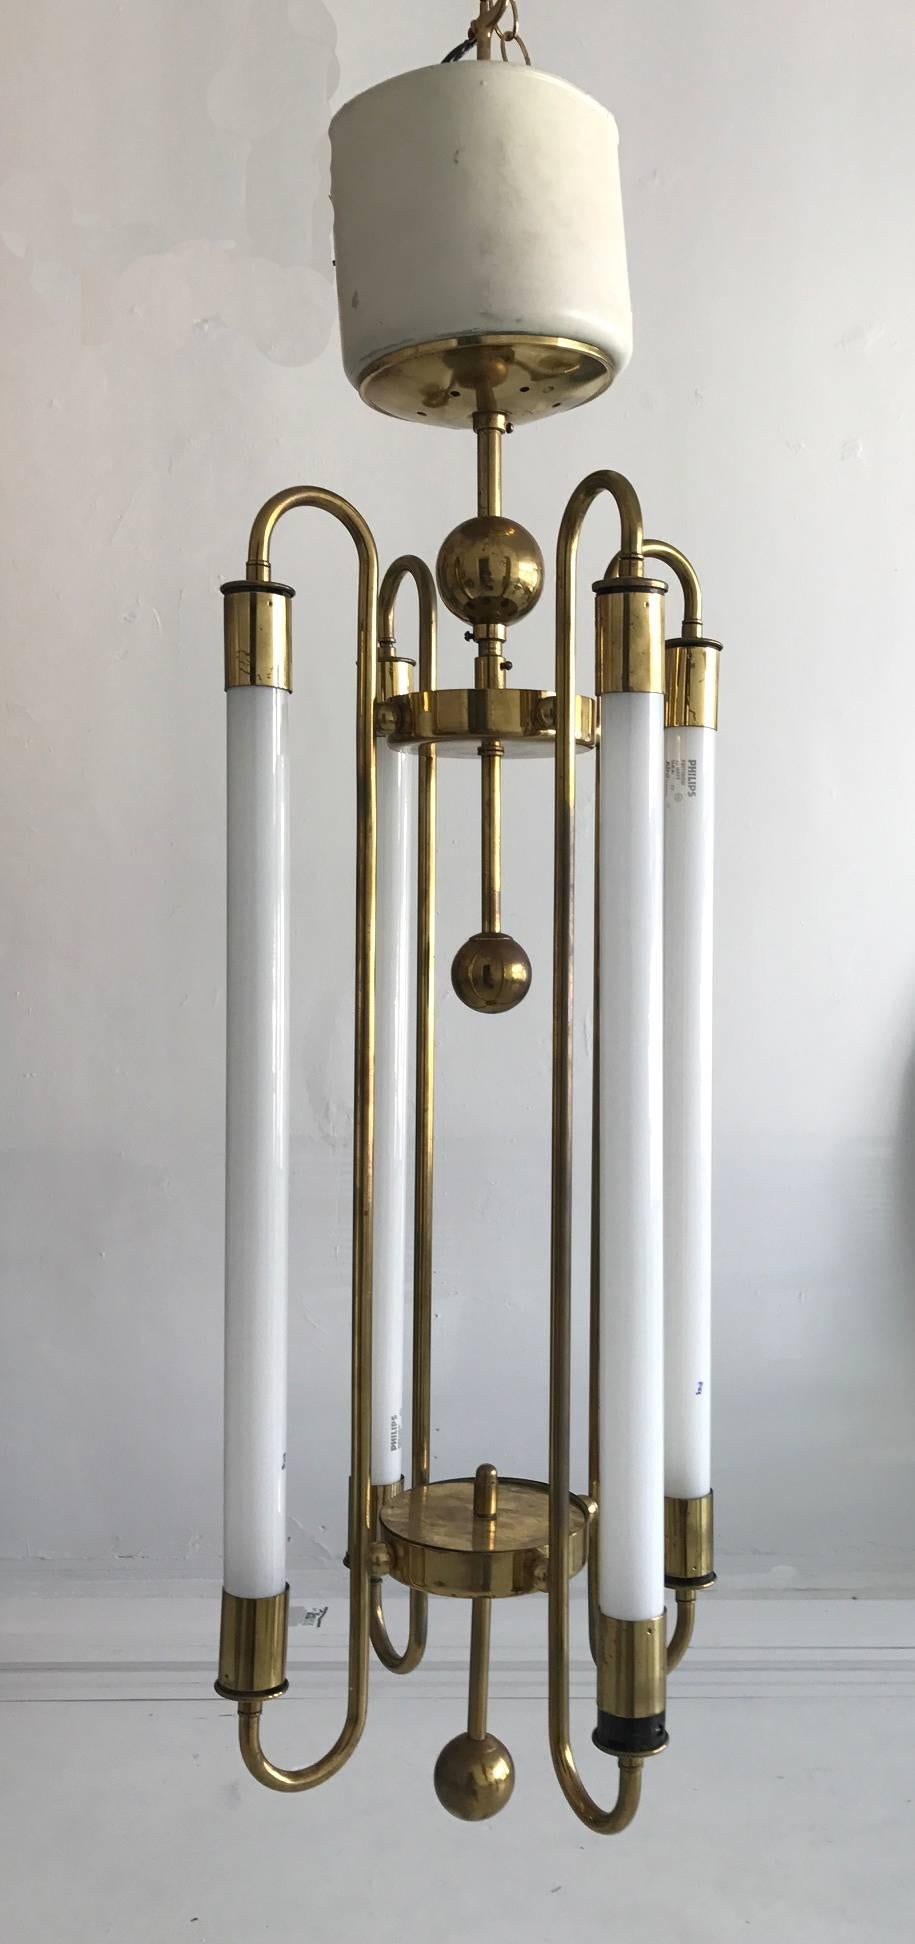 A brass and enameled chandelier by Kaiser & Co, made in Germany, circa 1940s. In the fashion of Art Deco transitioning into Modern and Bauhaus. Polished brass frame with large balls supports four fluorescent tubes. It makes a beautiful ceiling